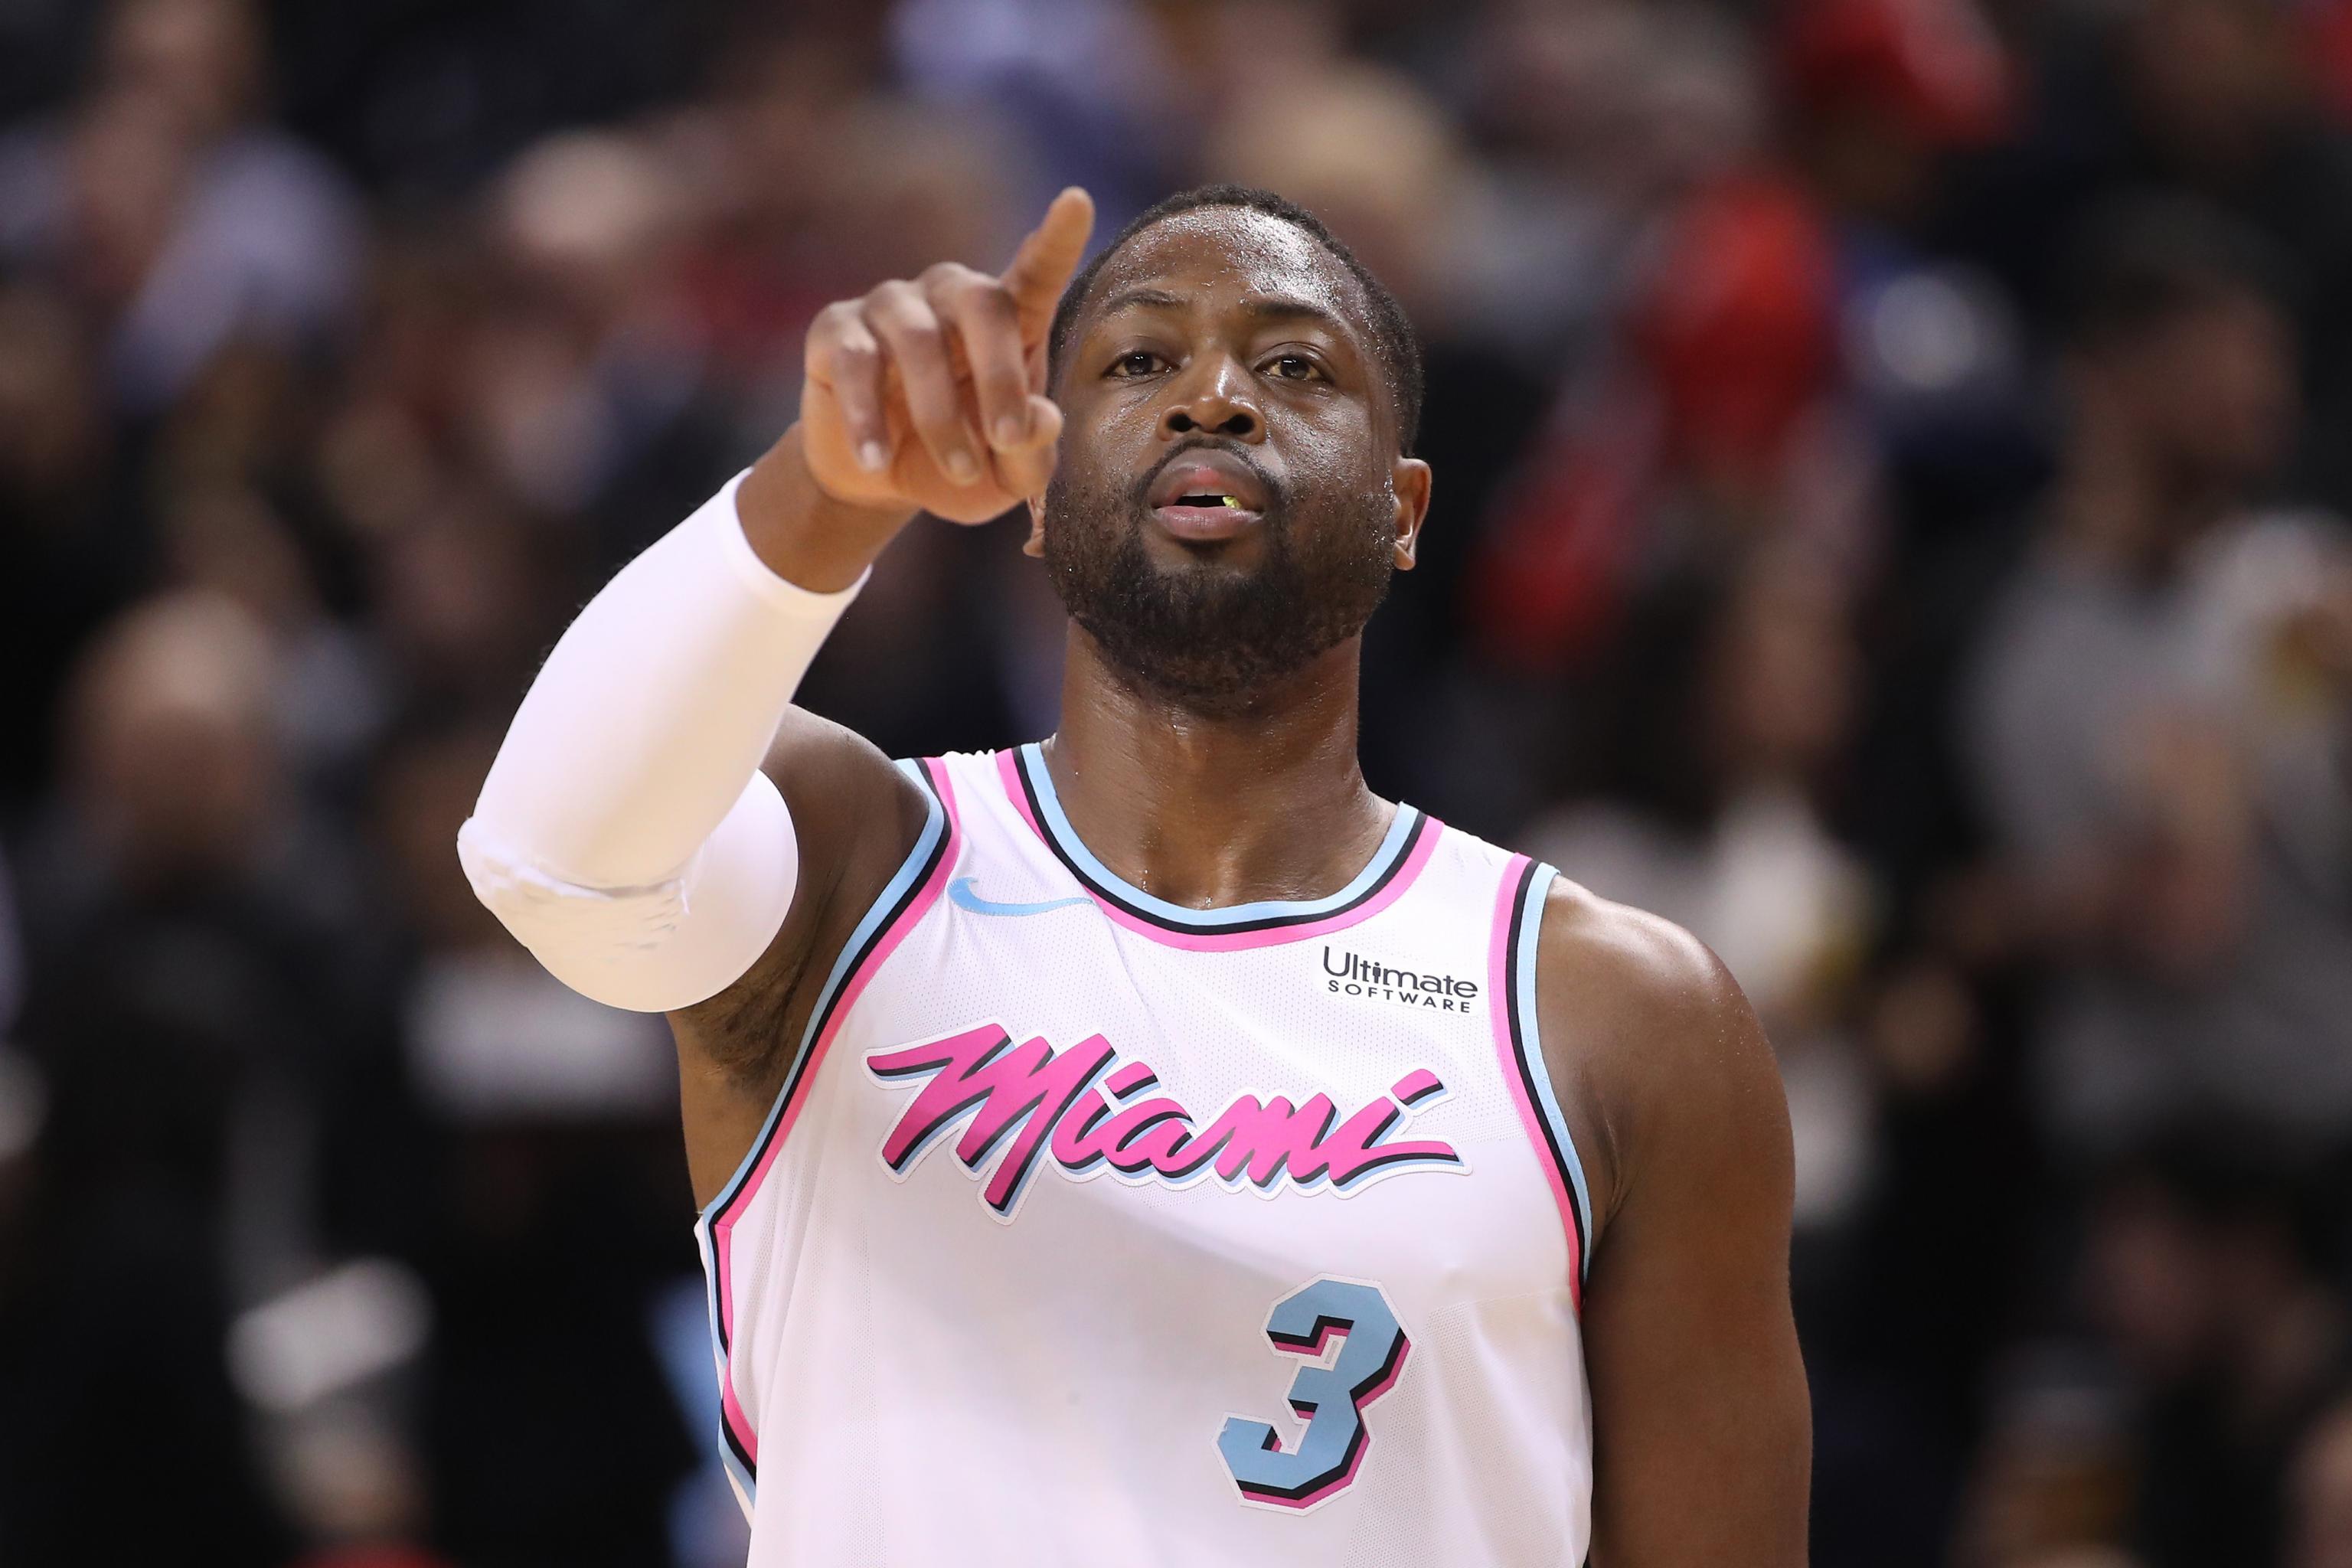 NBA Buzz - Dwyane Wade had his No. 3 jersey retired by the